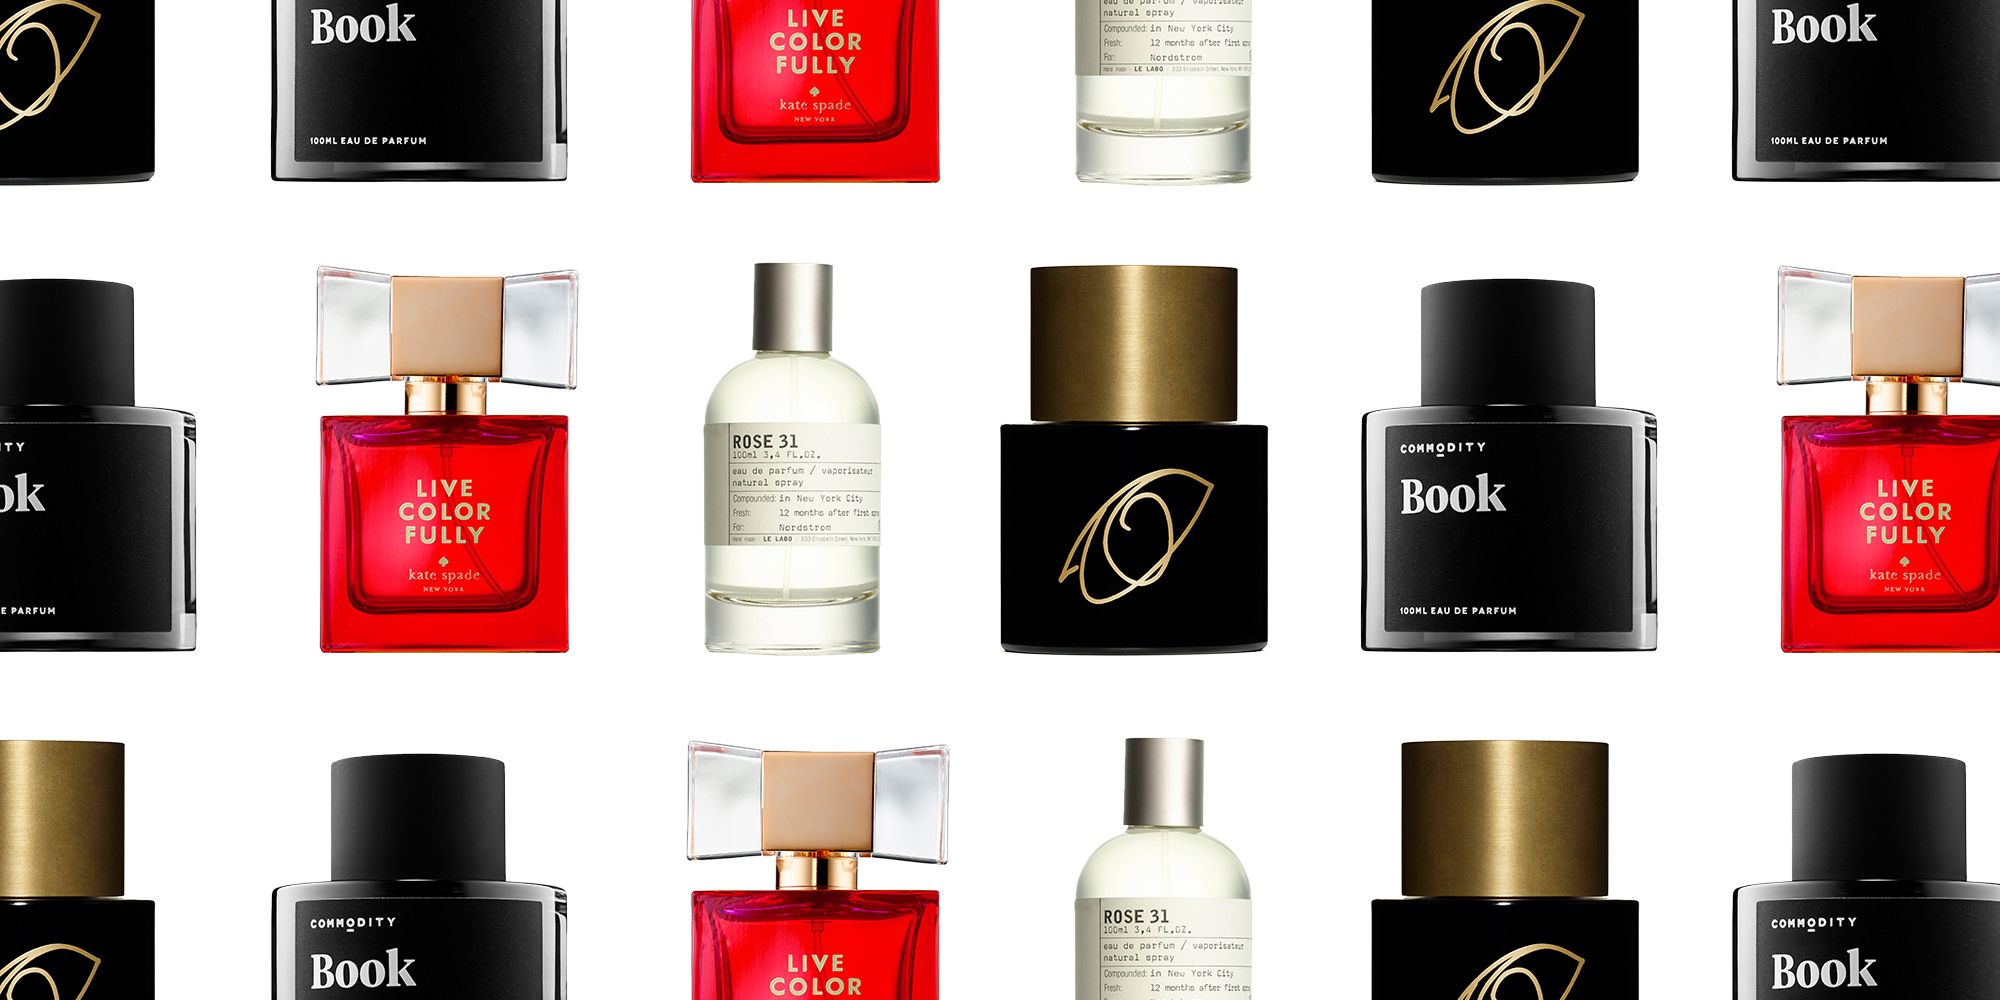 10 Best Perfumes ELLE Editors Share Their Signature Scents